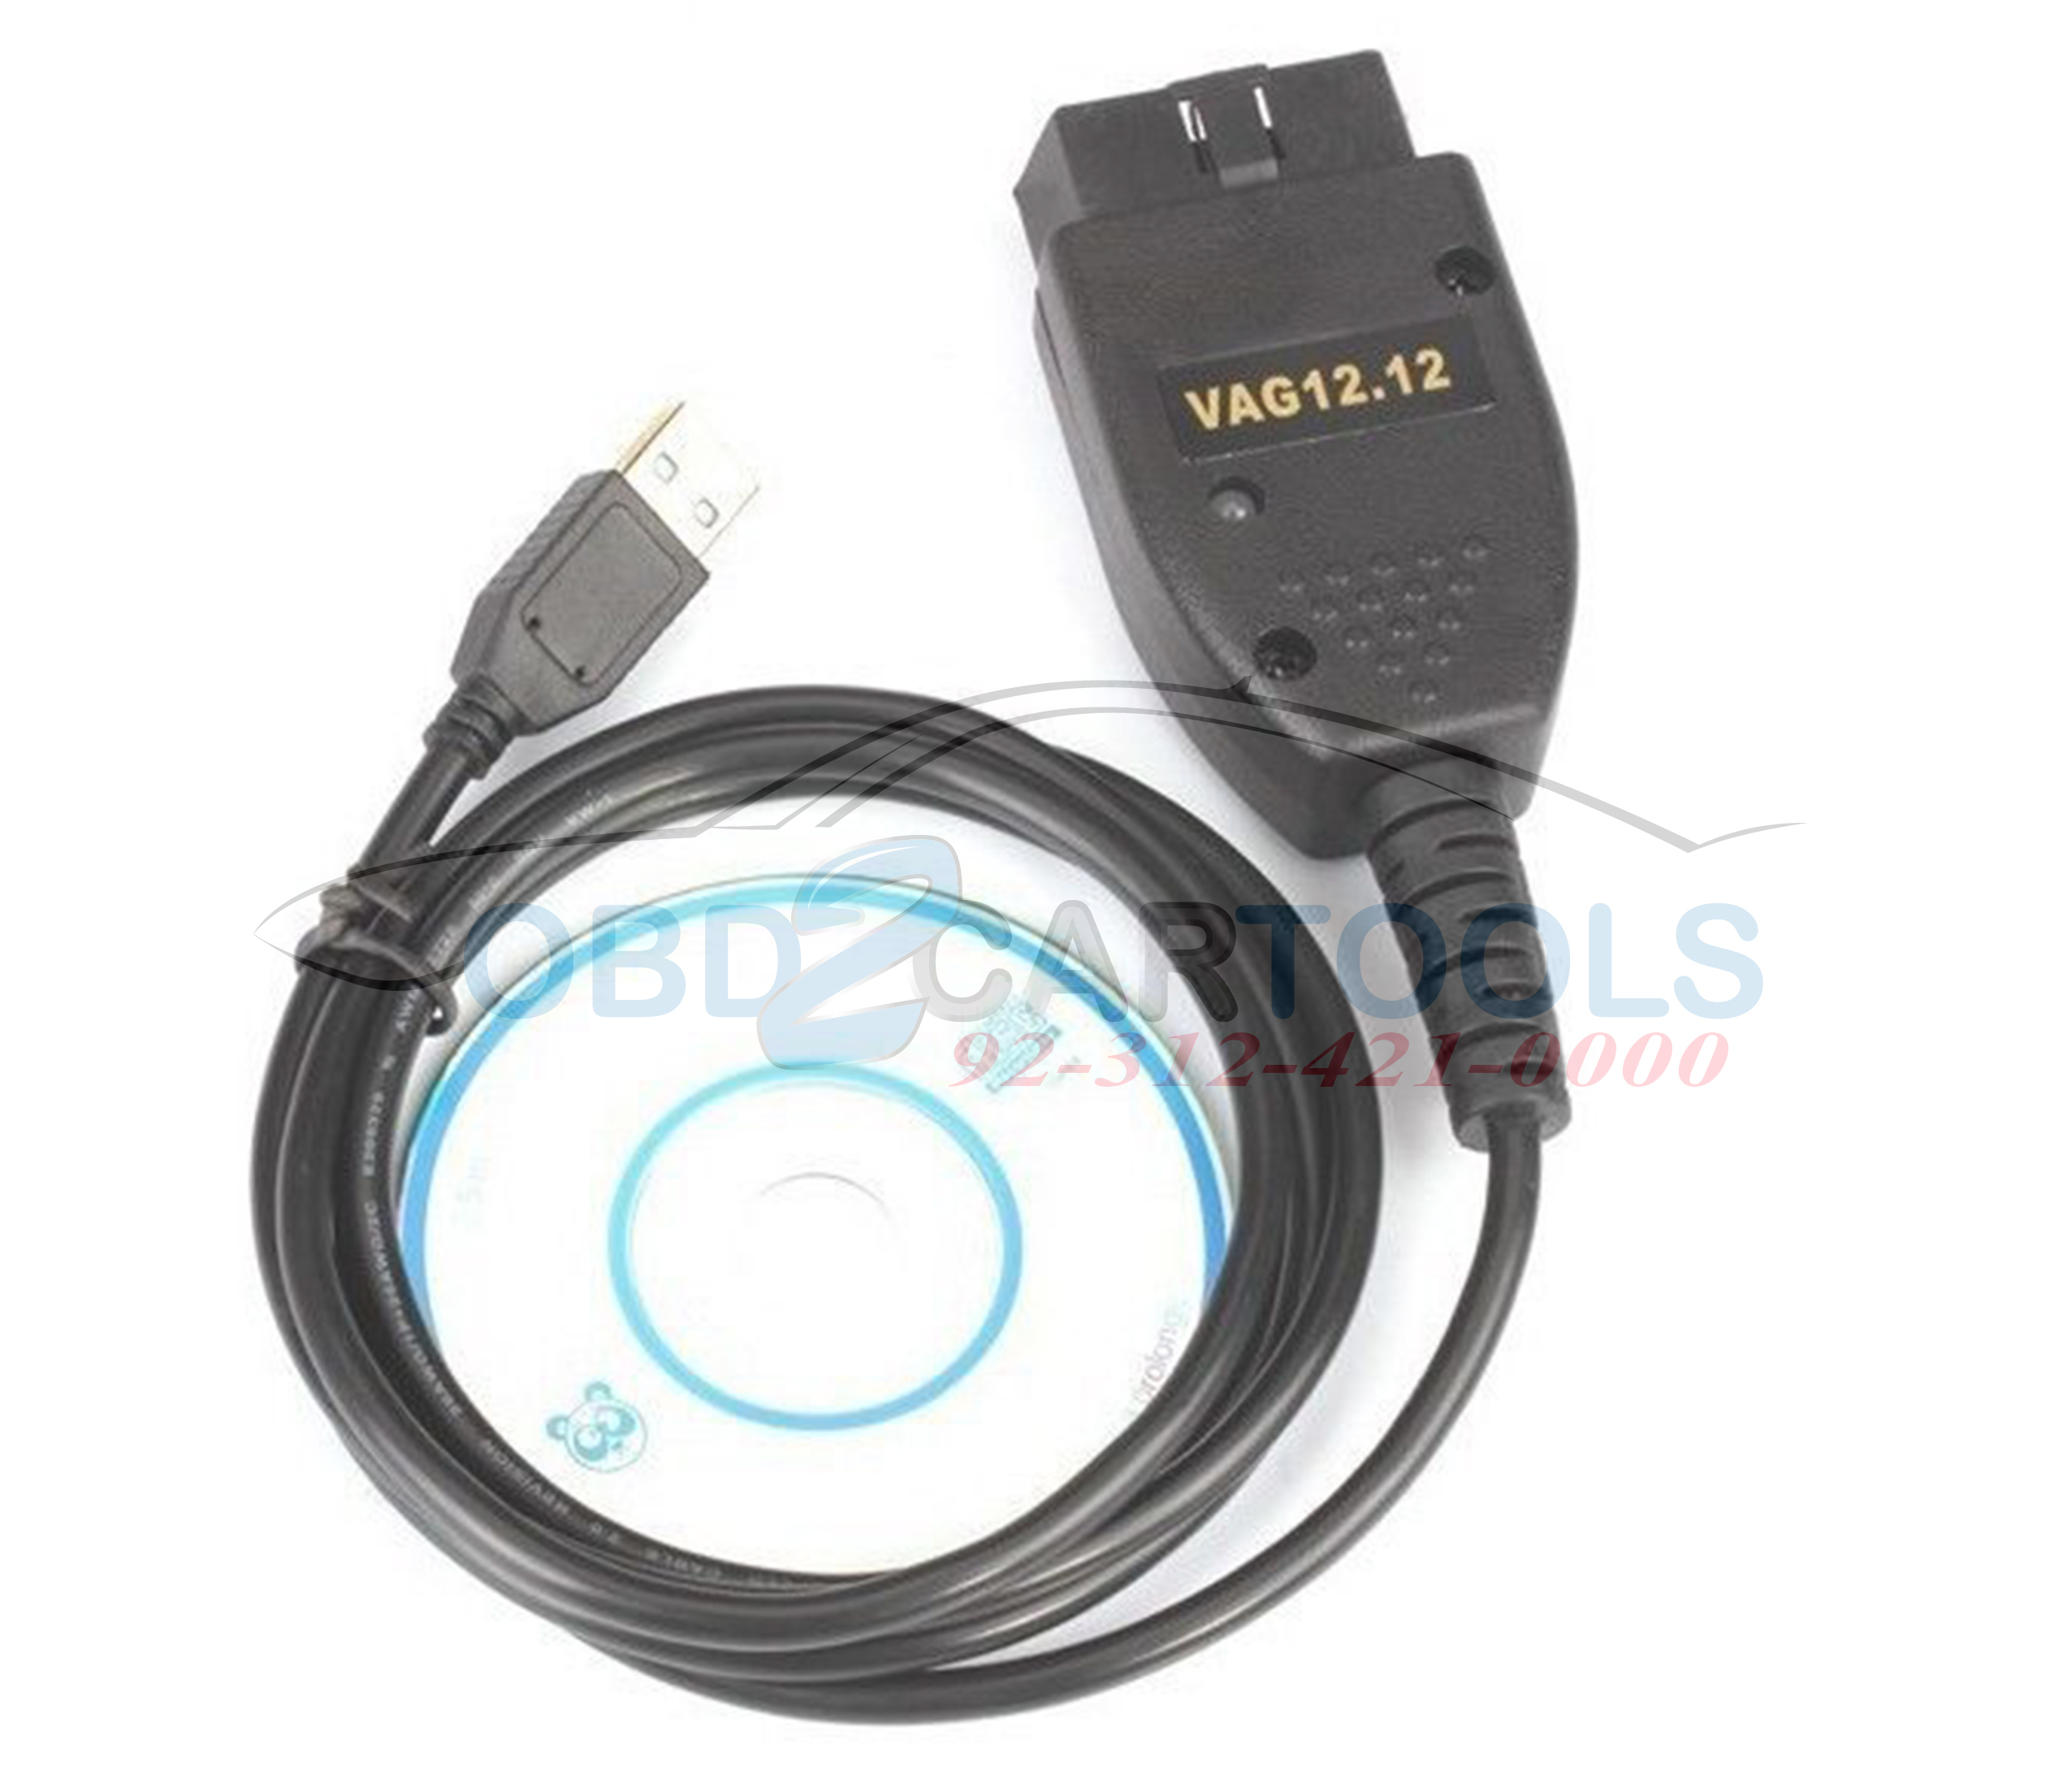 Product image for LATEST VAG COM VCDS HEX CAN USB DIAGNOSTIC CABLE OBD 2 AUDI VW SEAT SKODA